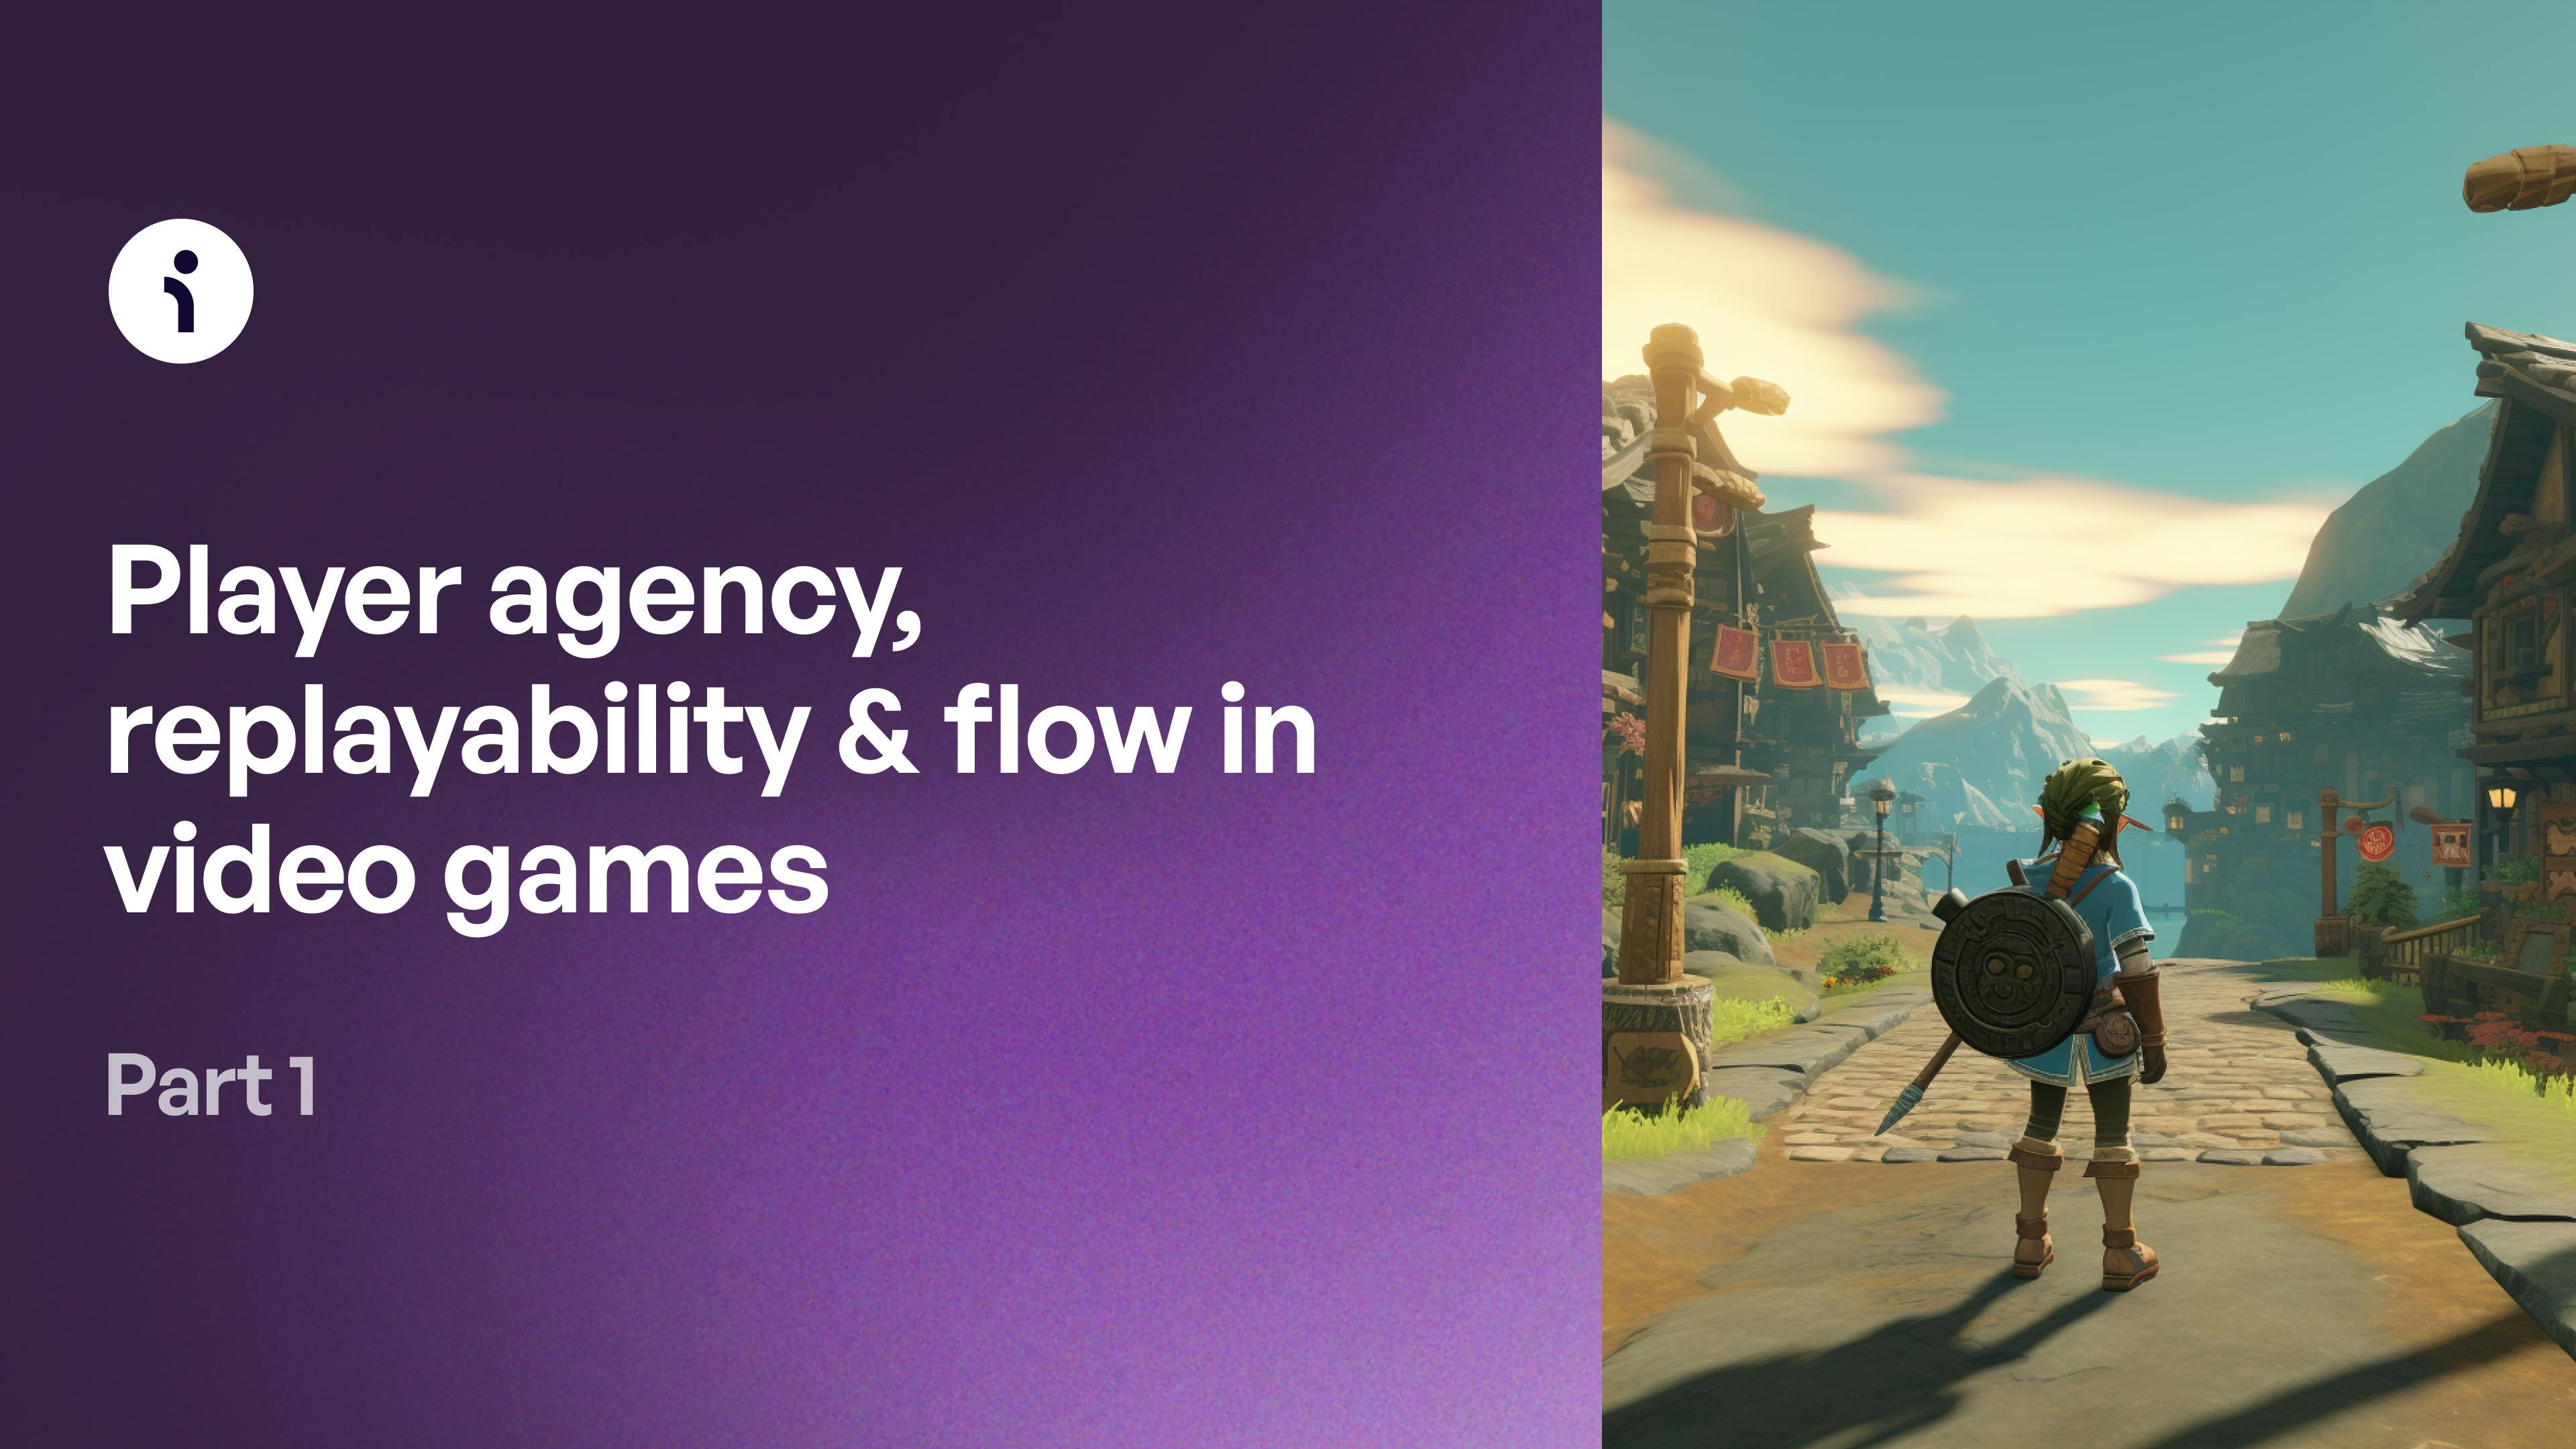 We dive into the research around video game narratives and player agency to show how player agency facilitates flow in video games and replayability.